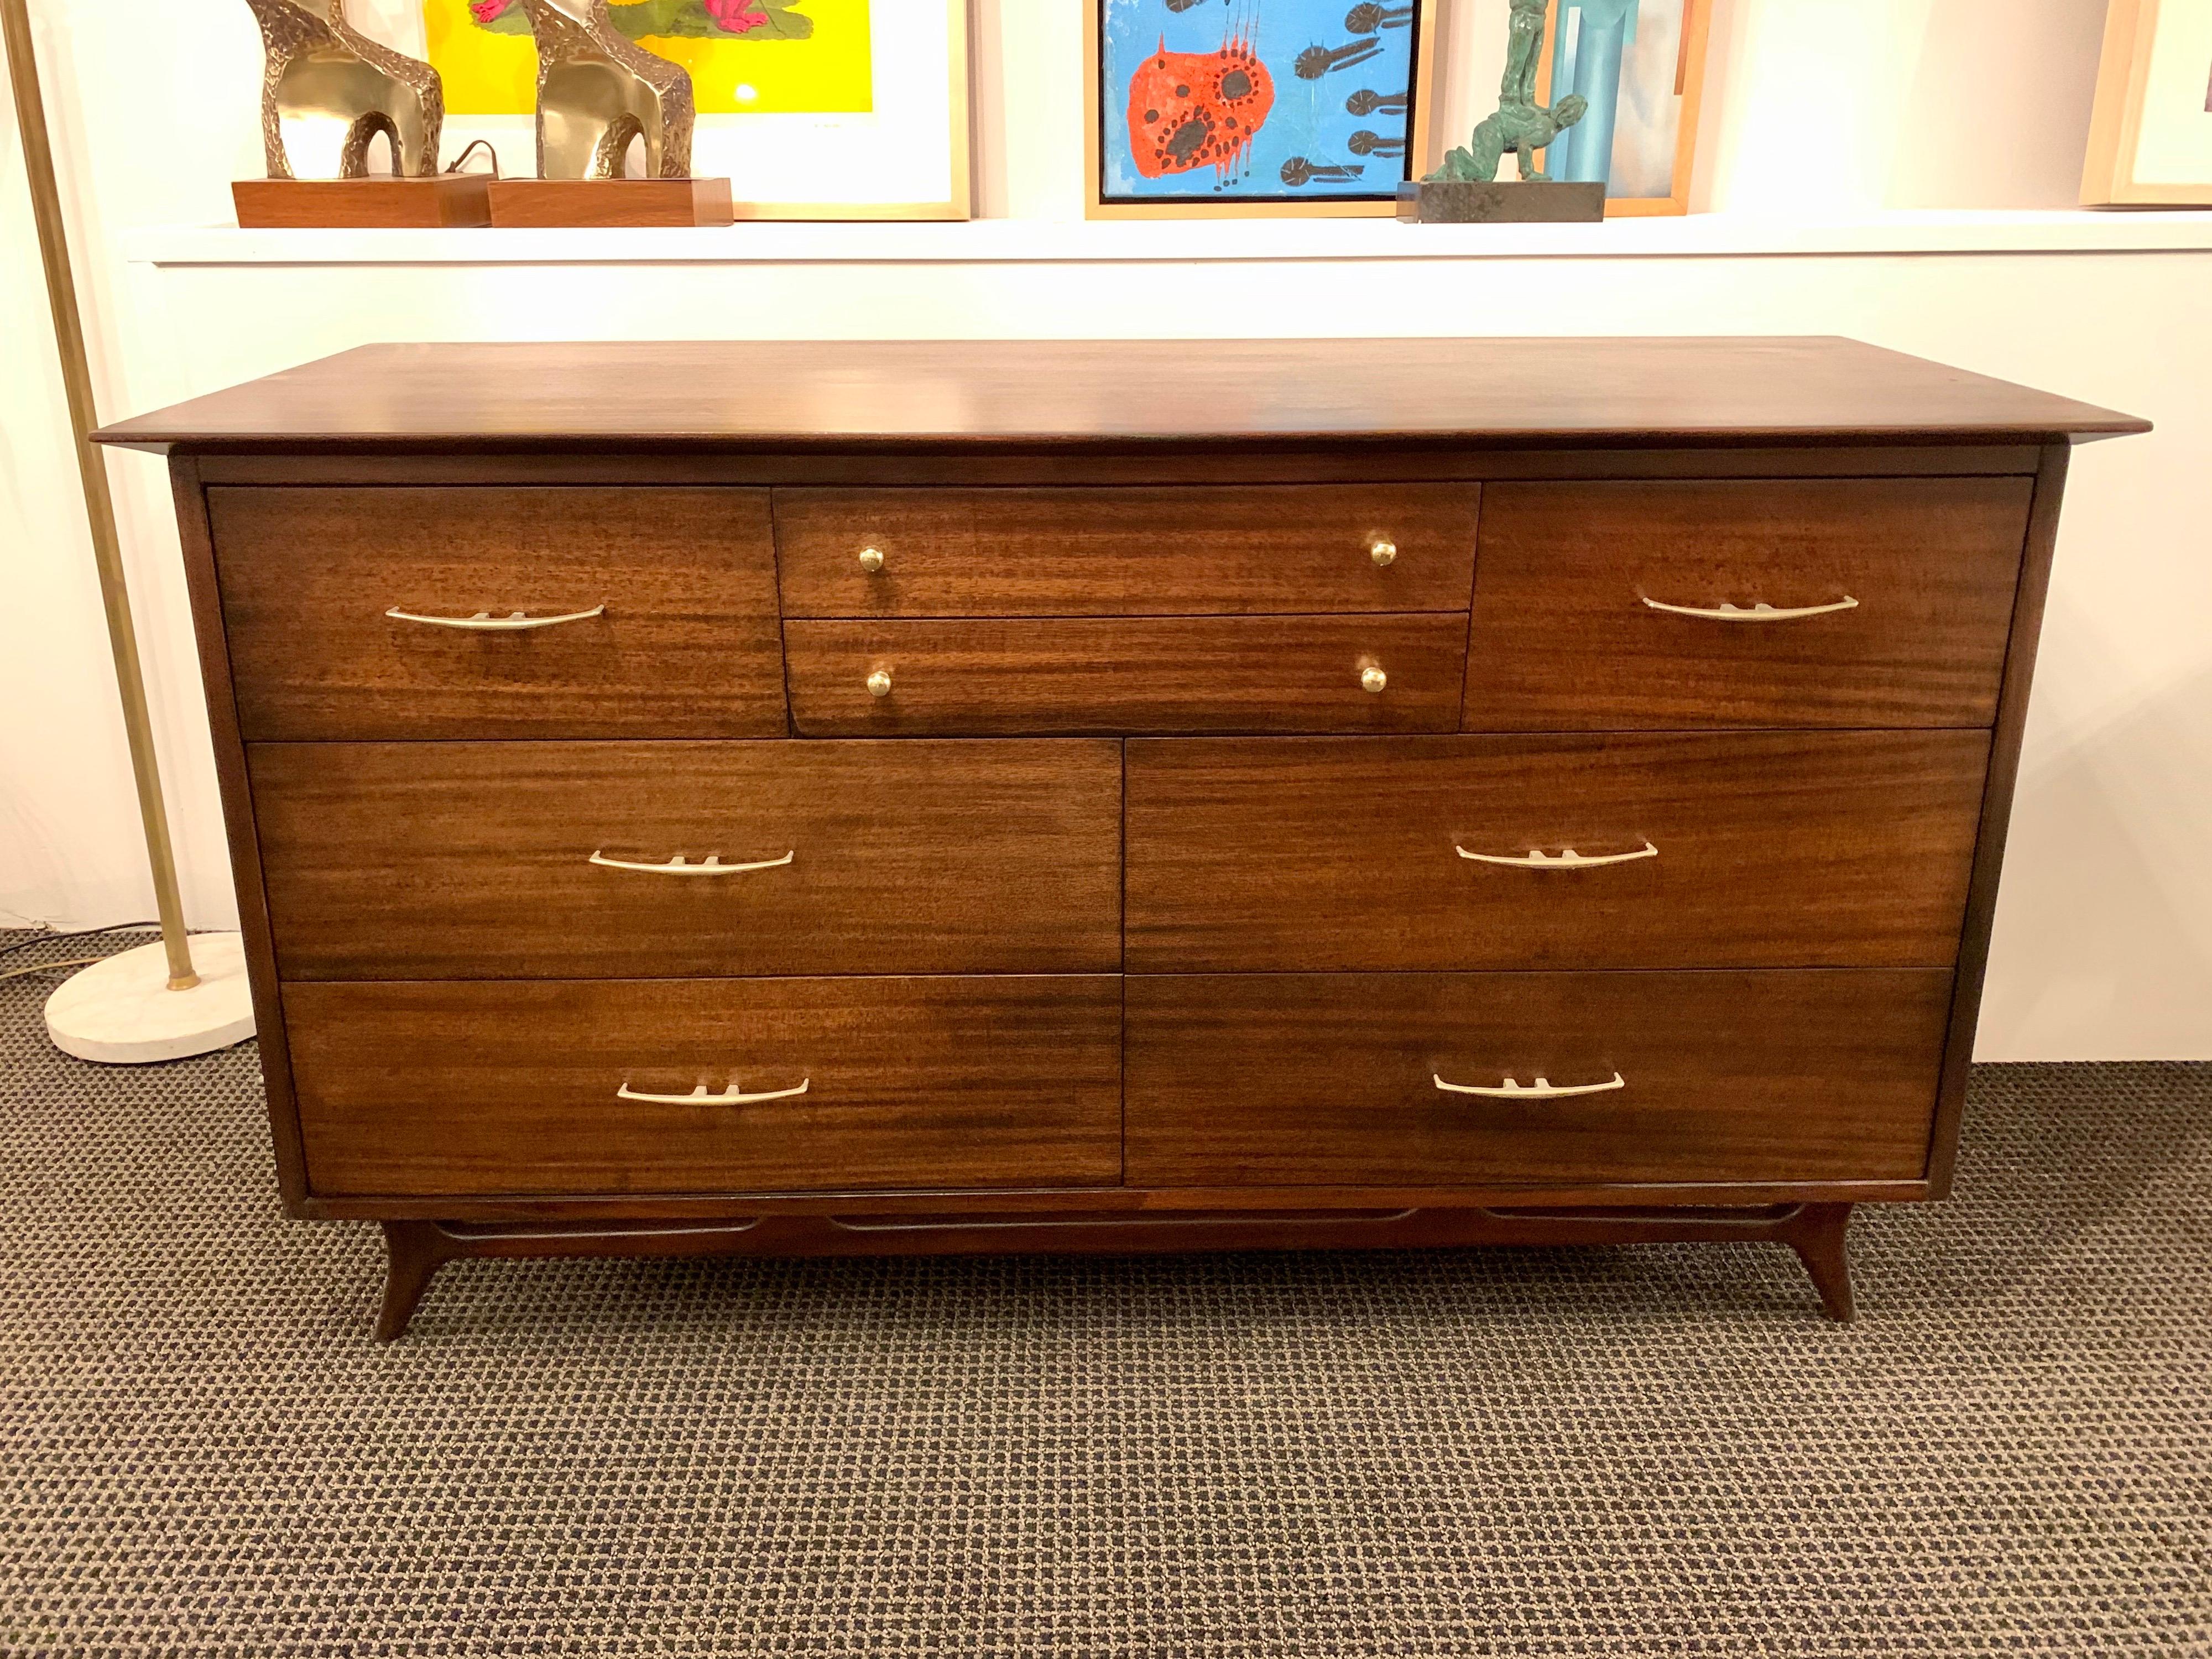 Beautifully design, this sculptural angled dresser in dark walnut finish with muted brass hardware. Many drawers for storage and in real fine vintage condition.